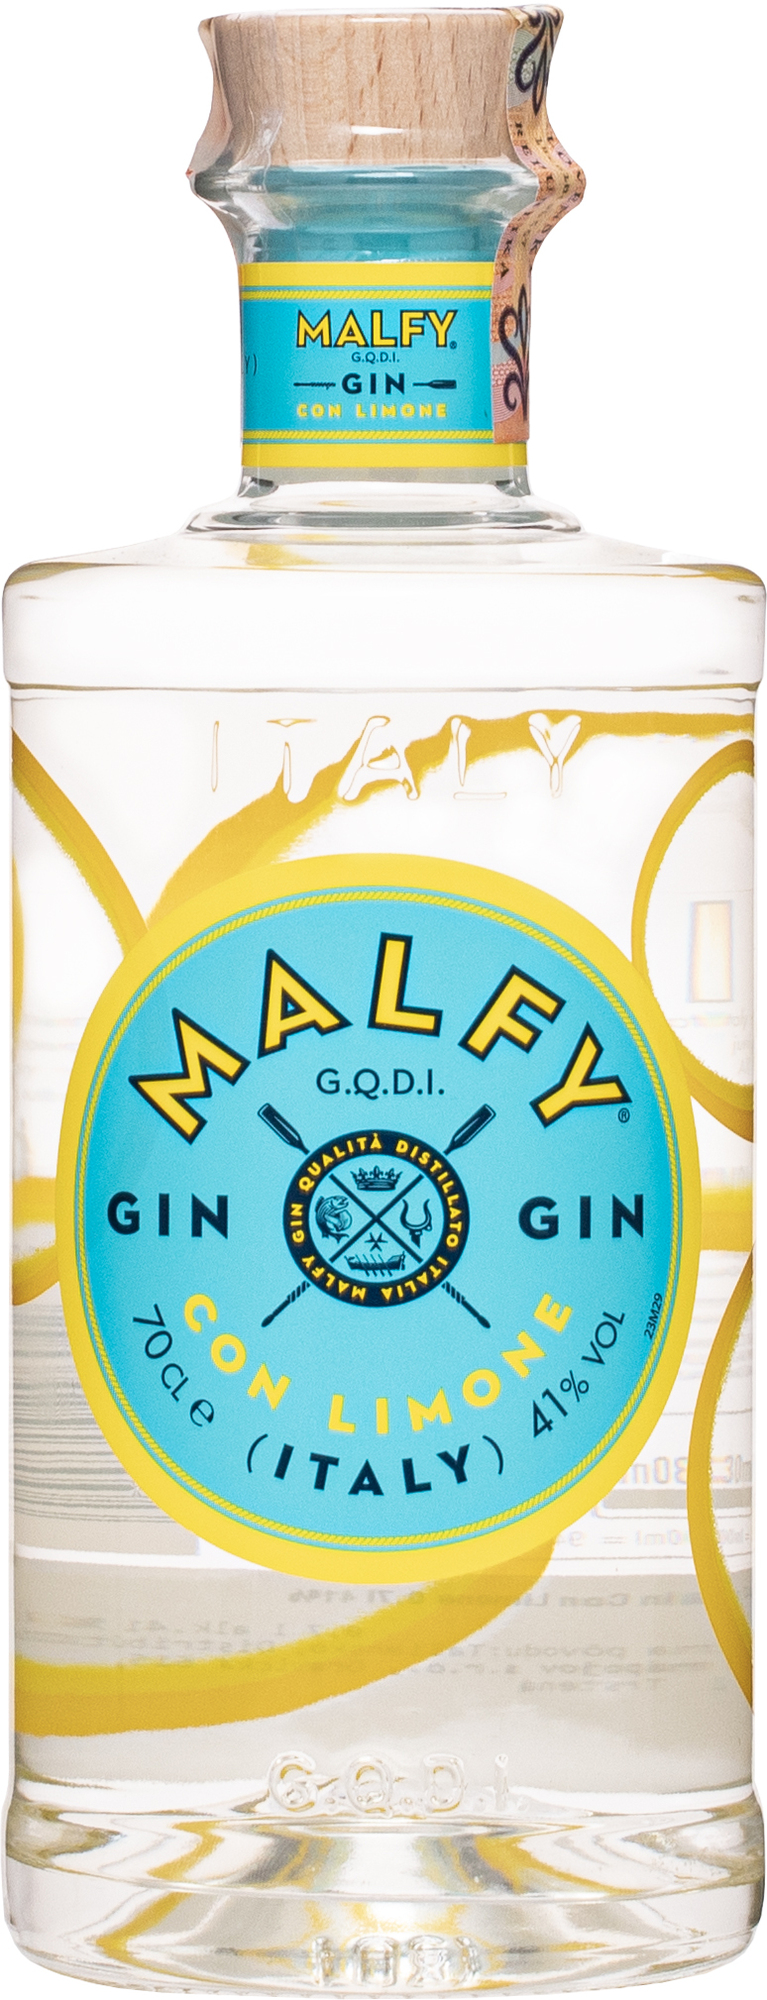 Malfy Gin Con Limone - Flavored Gin